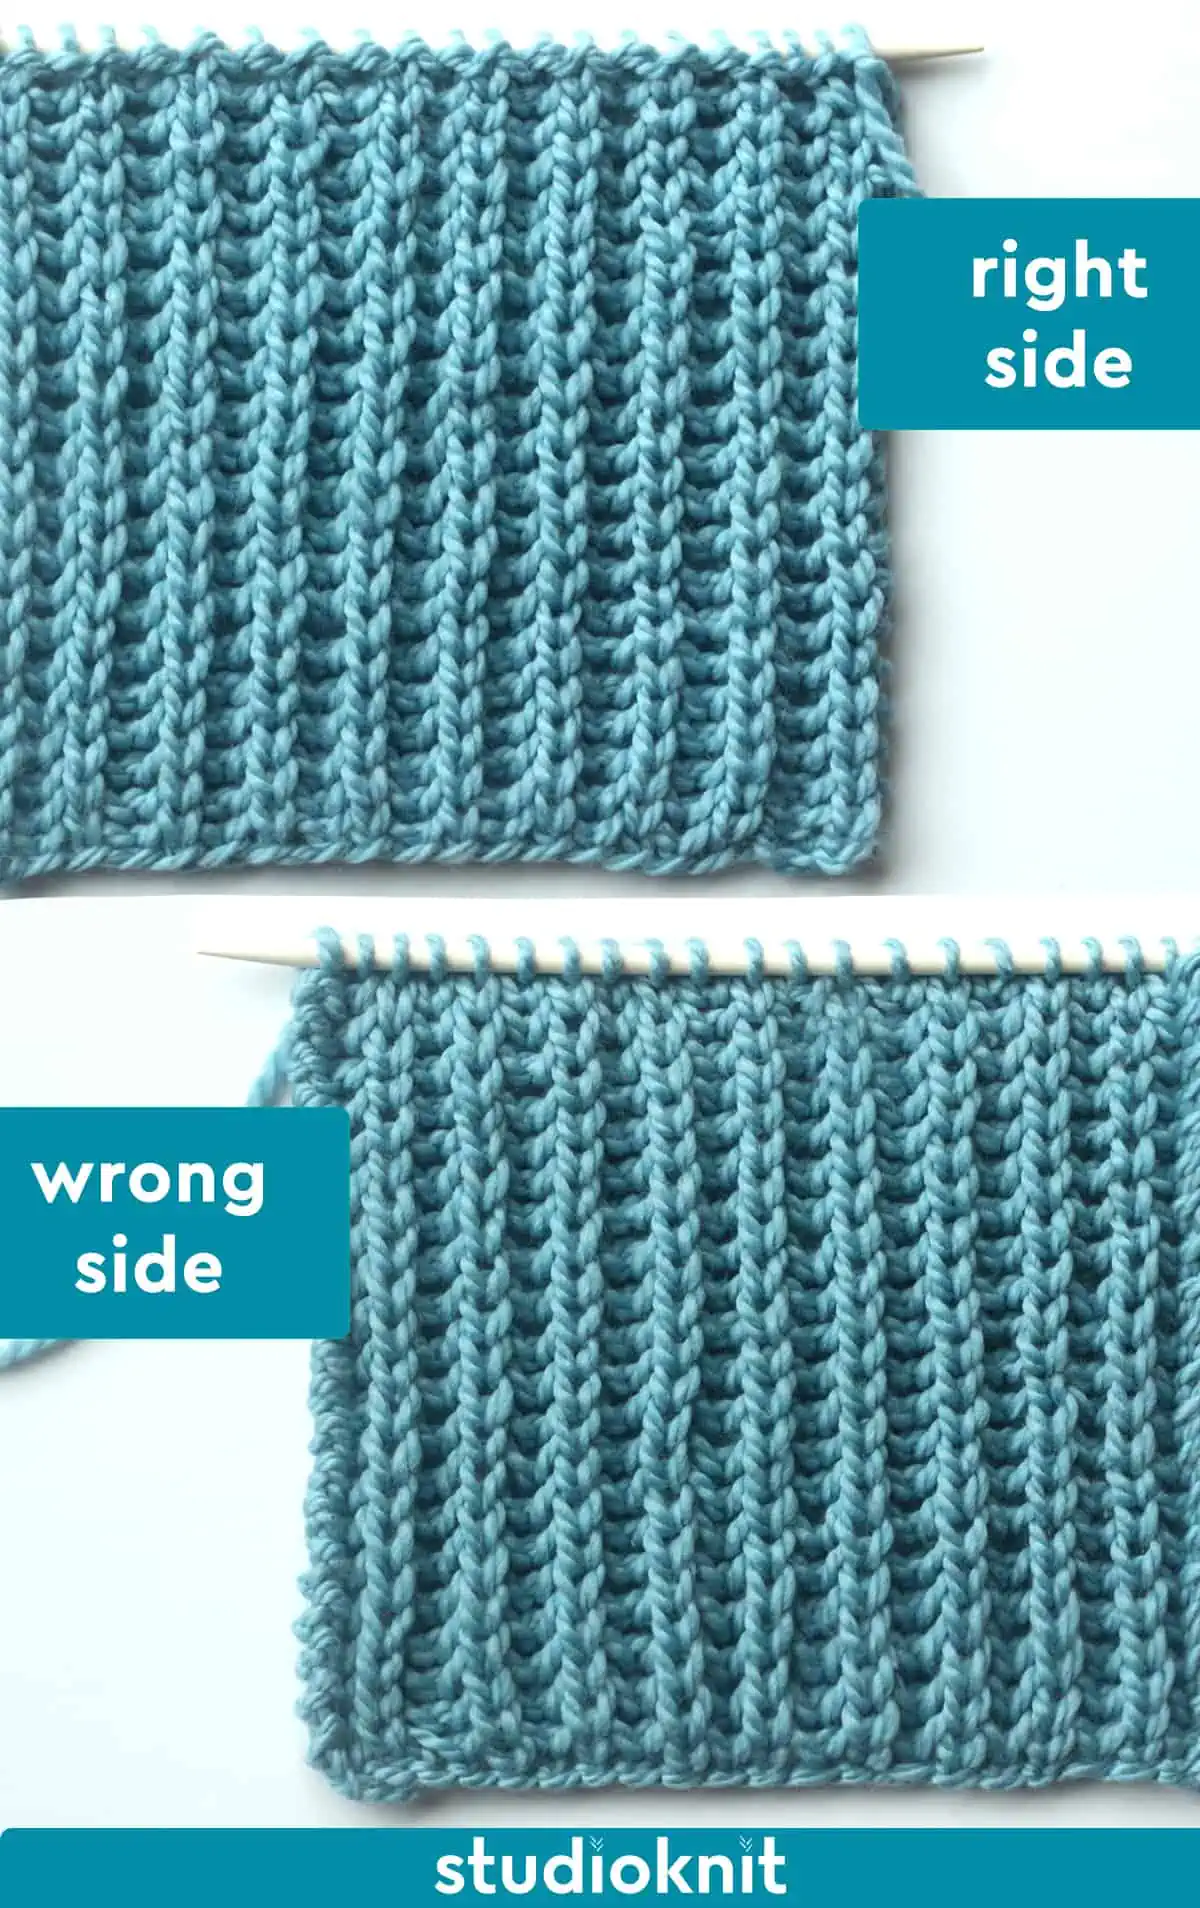 Right and wrong sides of Fisherman's Rib knit stitch pattern knitted flat with a straight knitting needle in light blue yarn color.